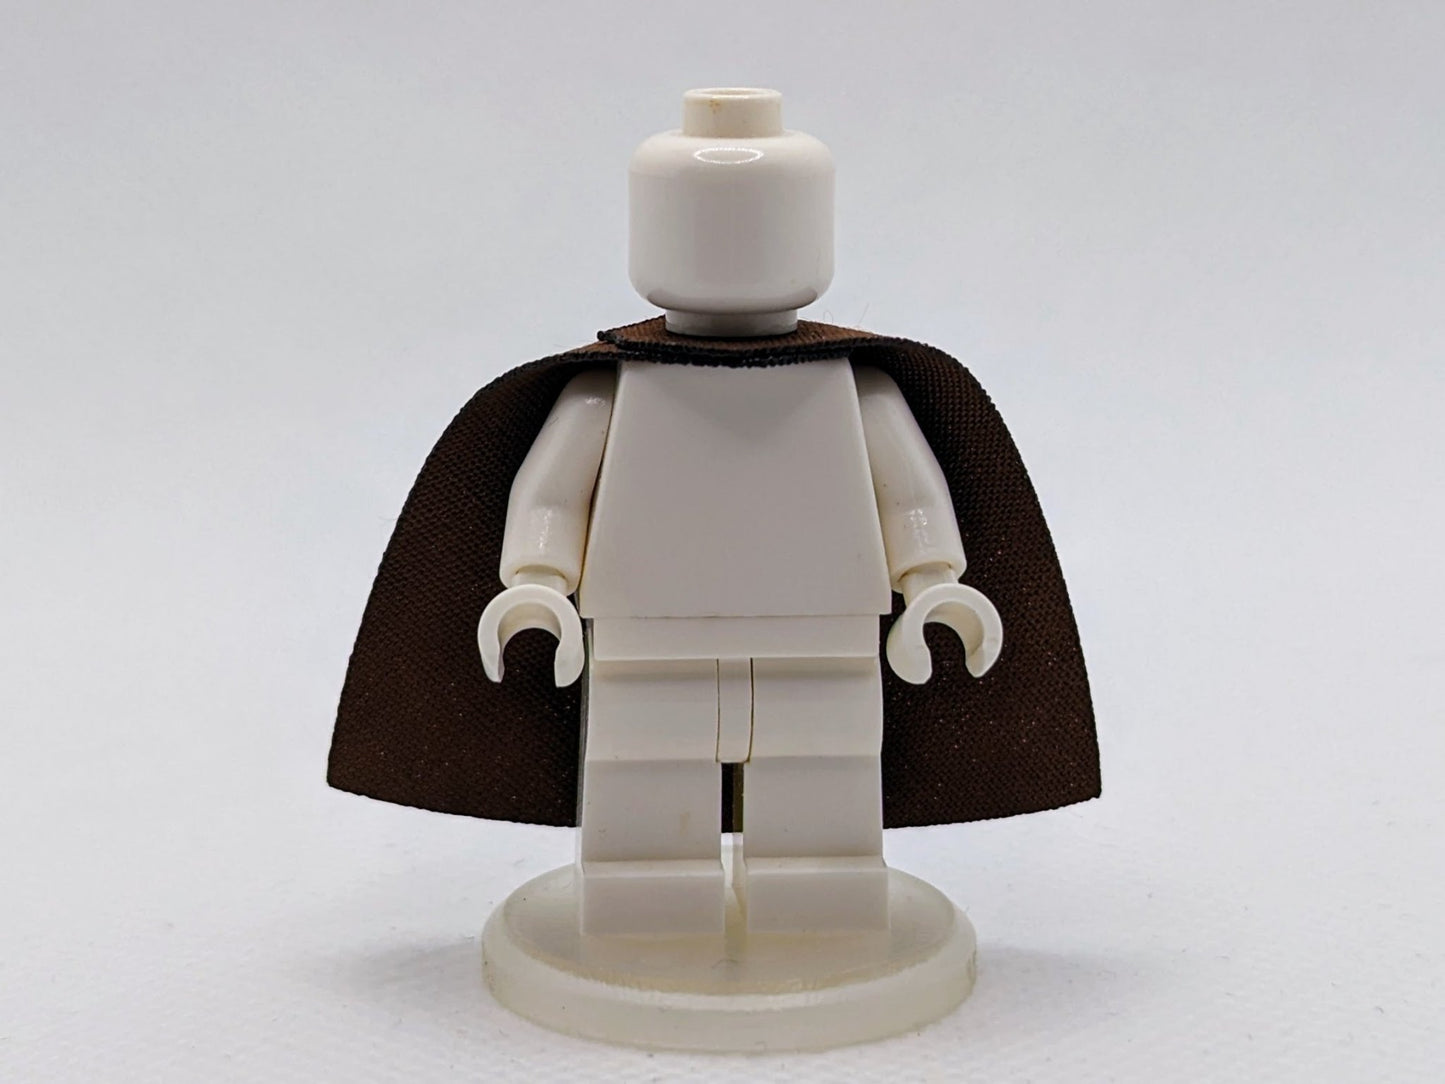 Standard Cape by capes4minifigs - RPGminifigs